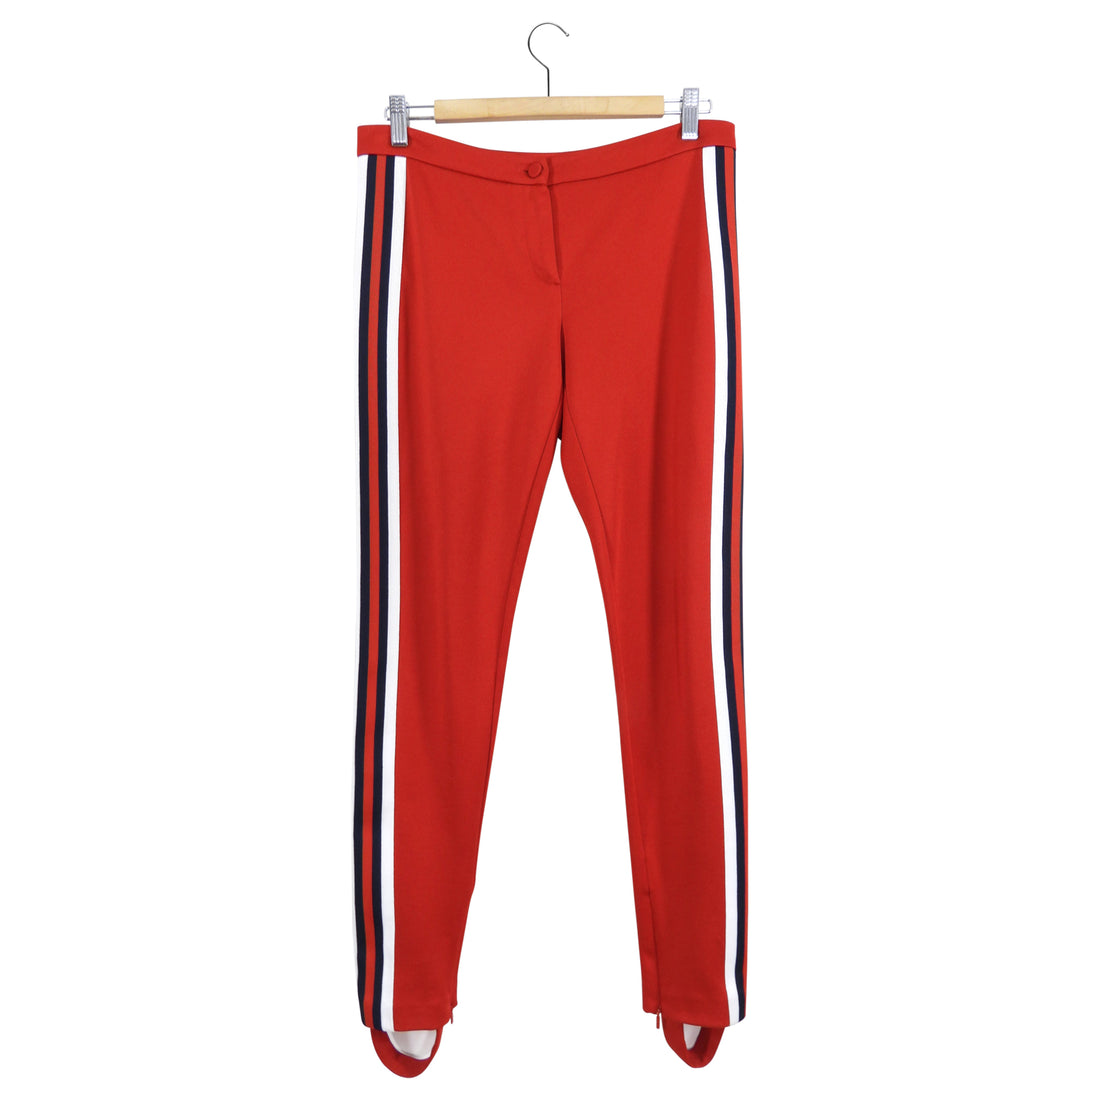 Gucci Red Knit Jersey Stripe Leggings / Joggers - M – I MISS YOU VINTAGE